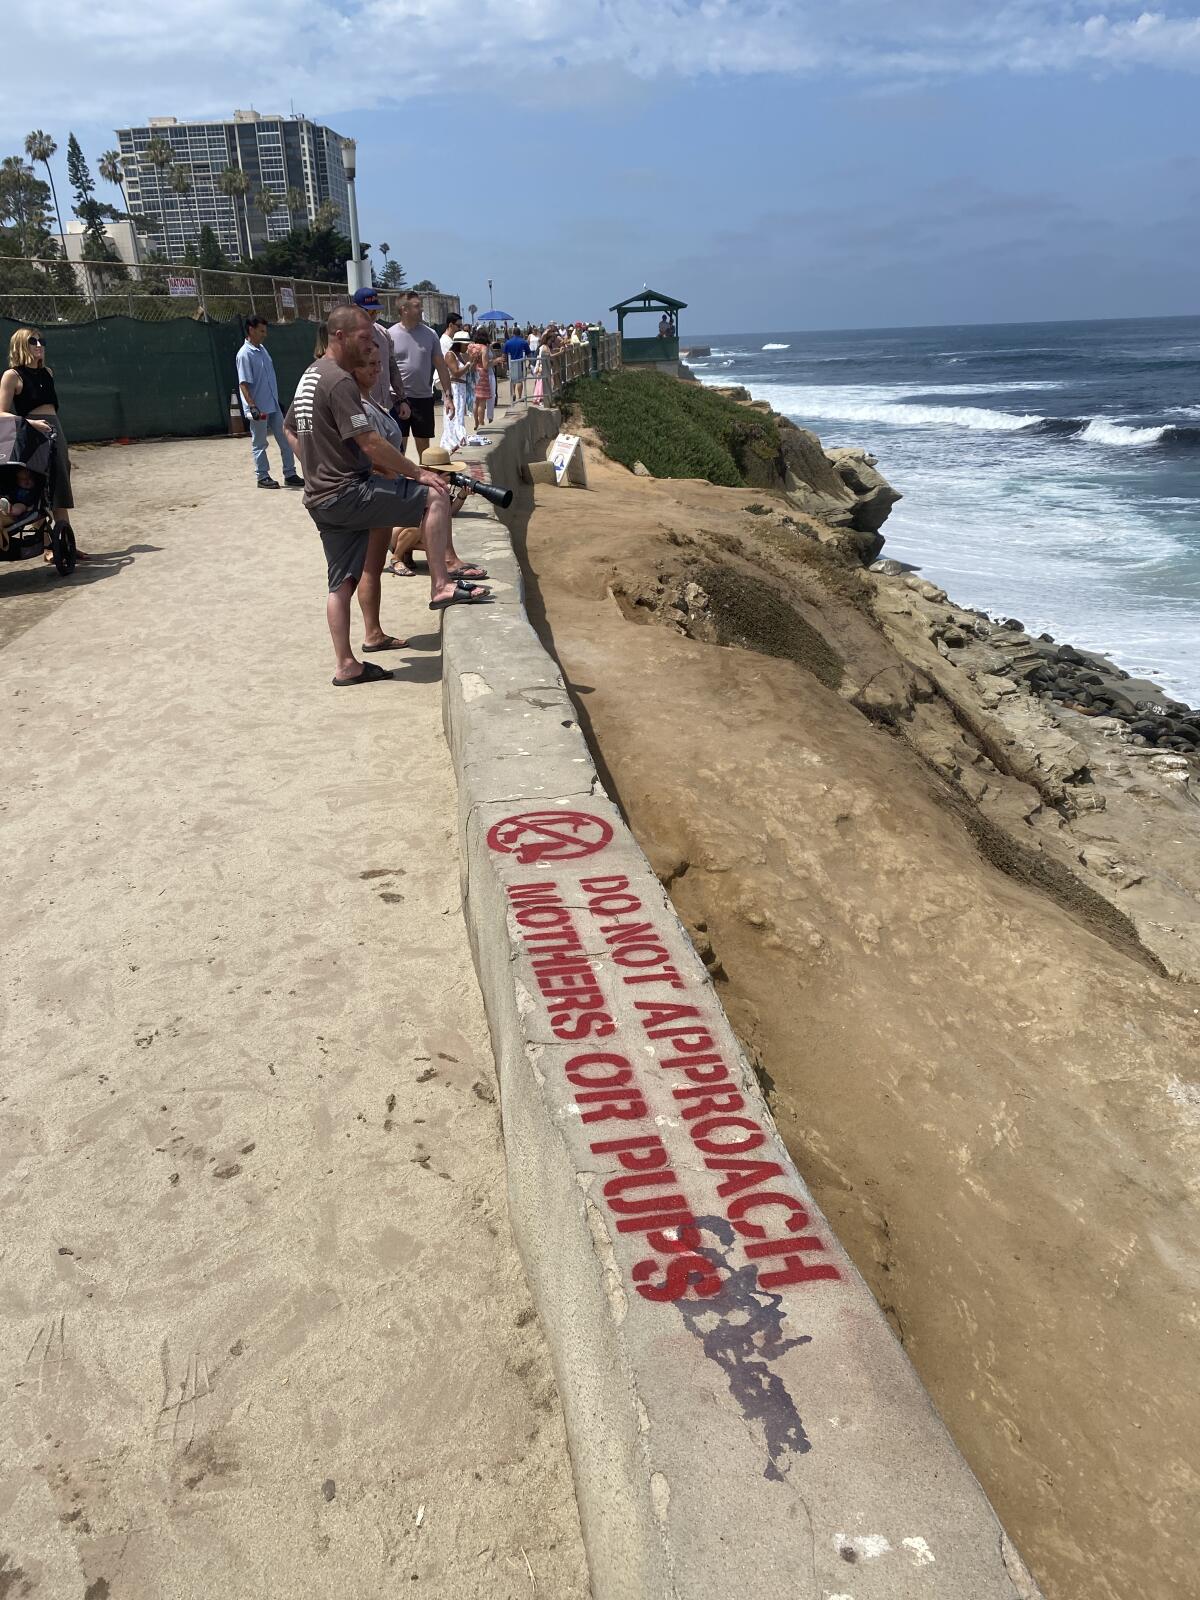 Stenciling on the short wall above Point La Jolla directs visitors not to approach sea lion mothers or pups.